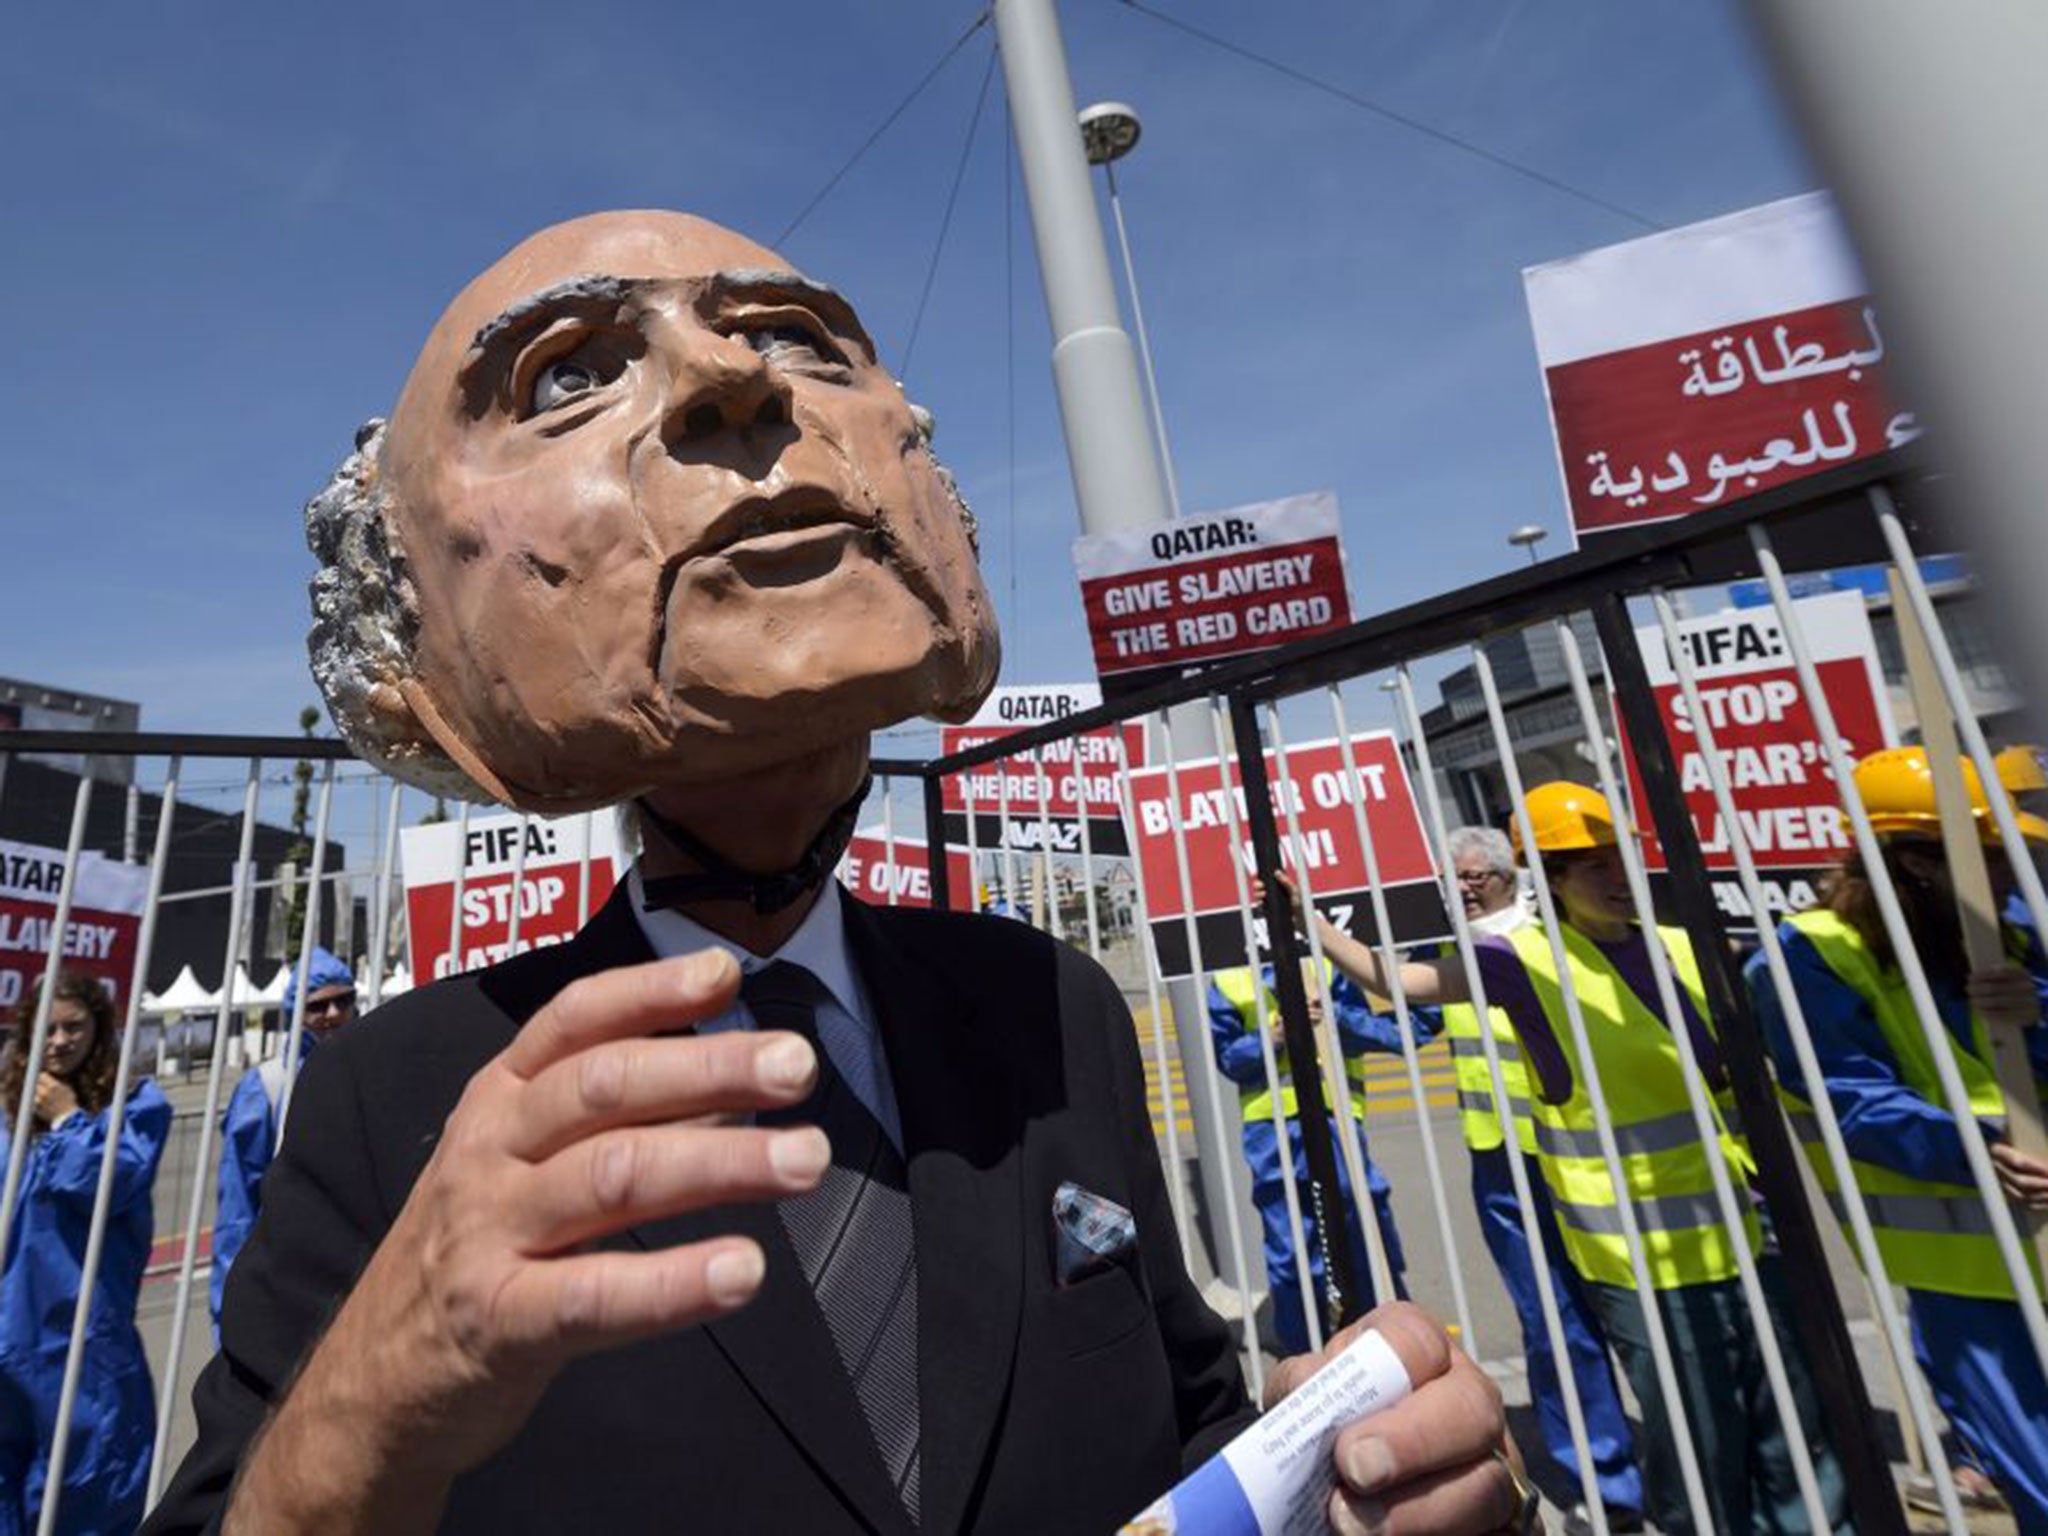 A protester disguised as Sepp Blatter takes part in a demonstration against the condition of workers in Qatar outside the Fifa Congress in Zurich